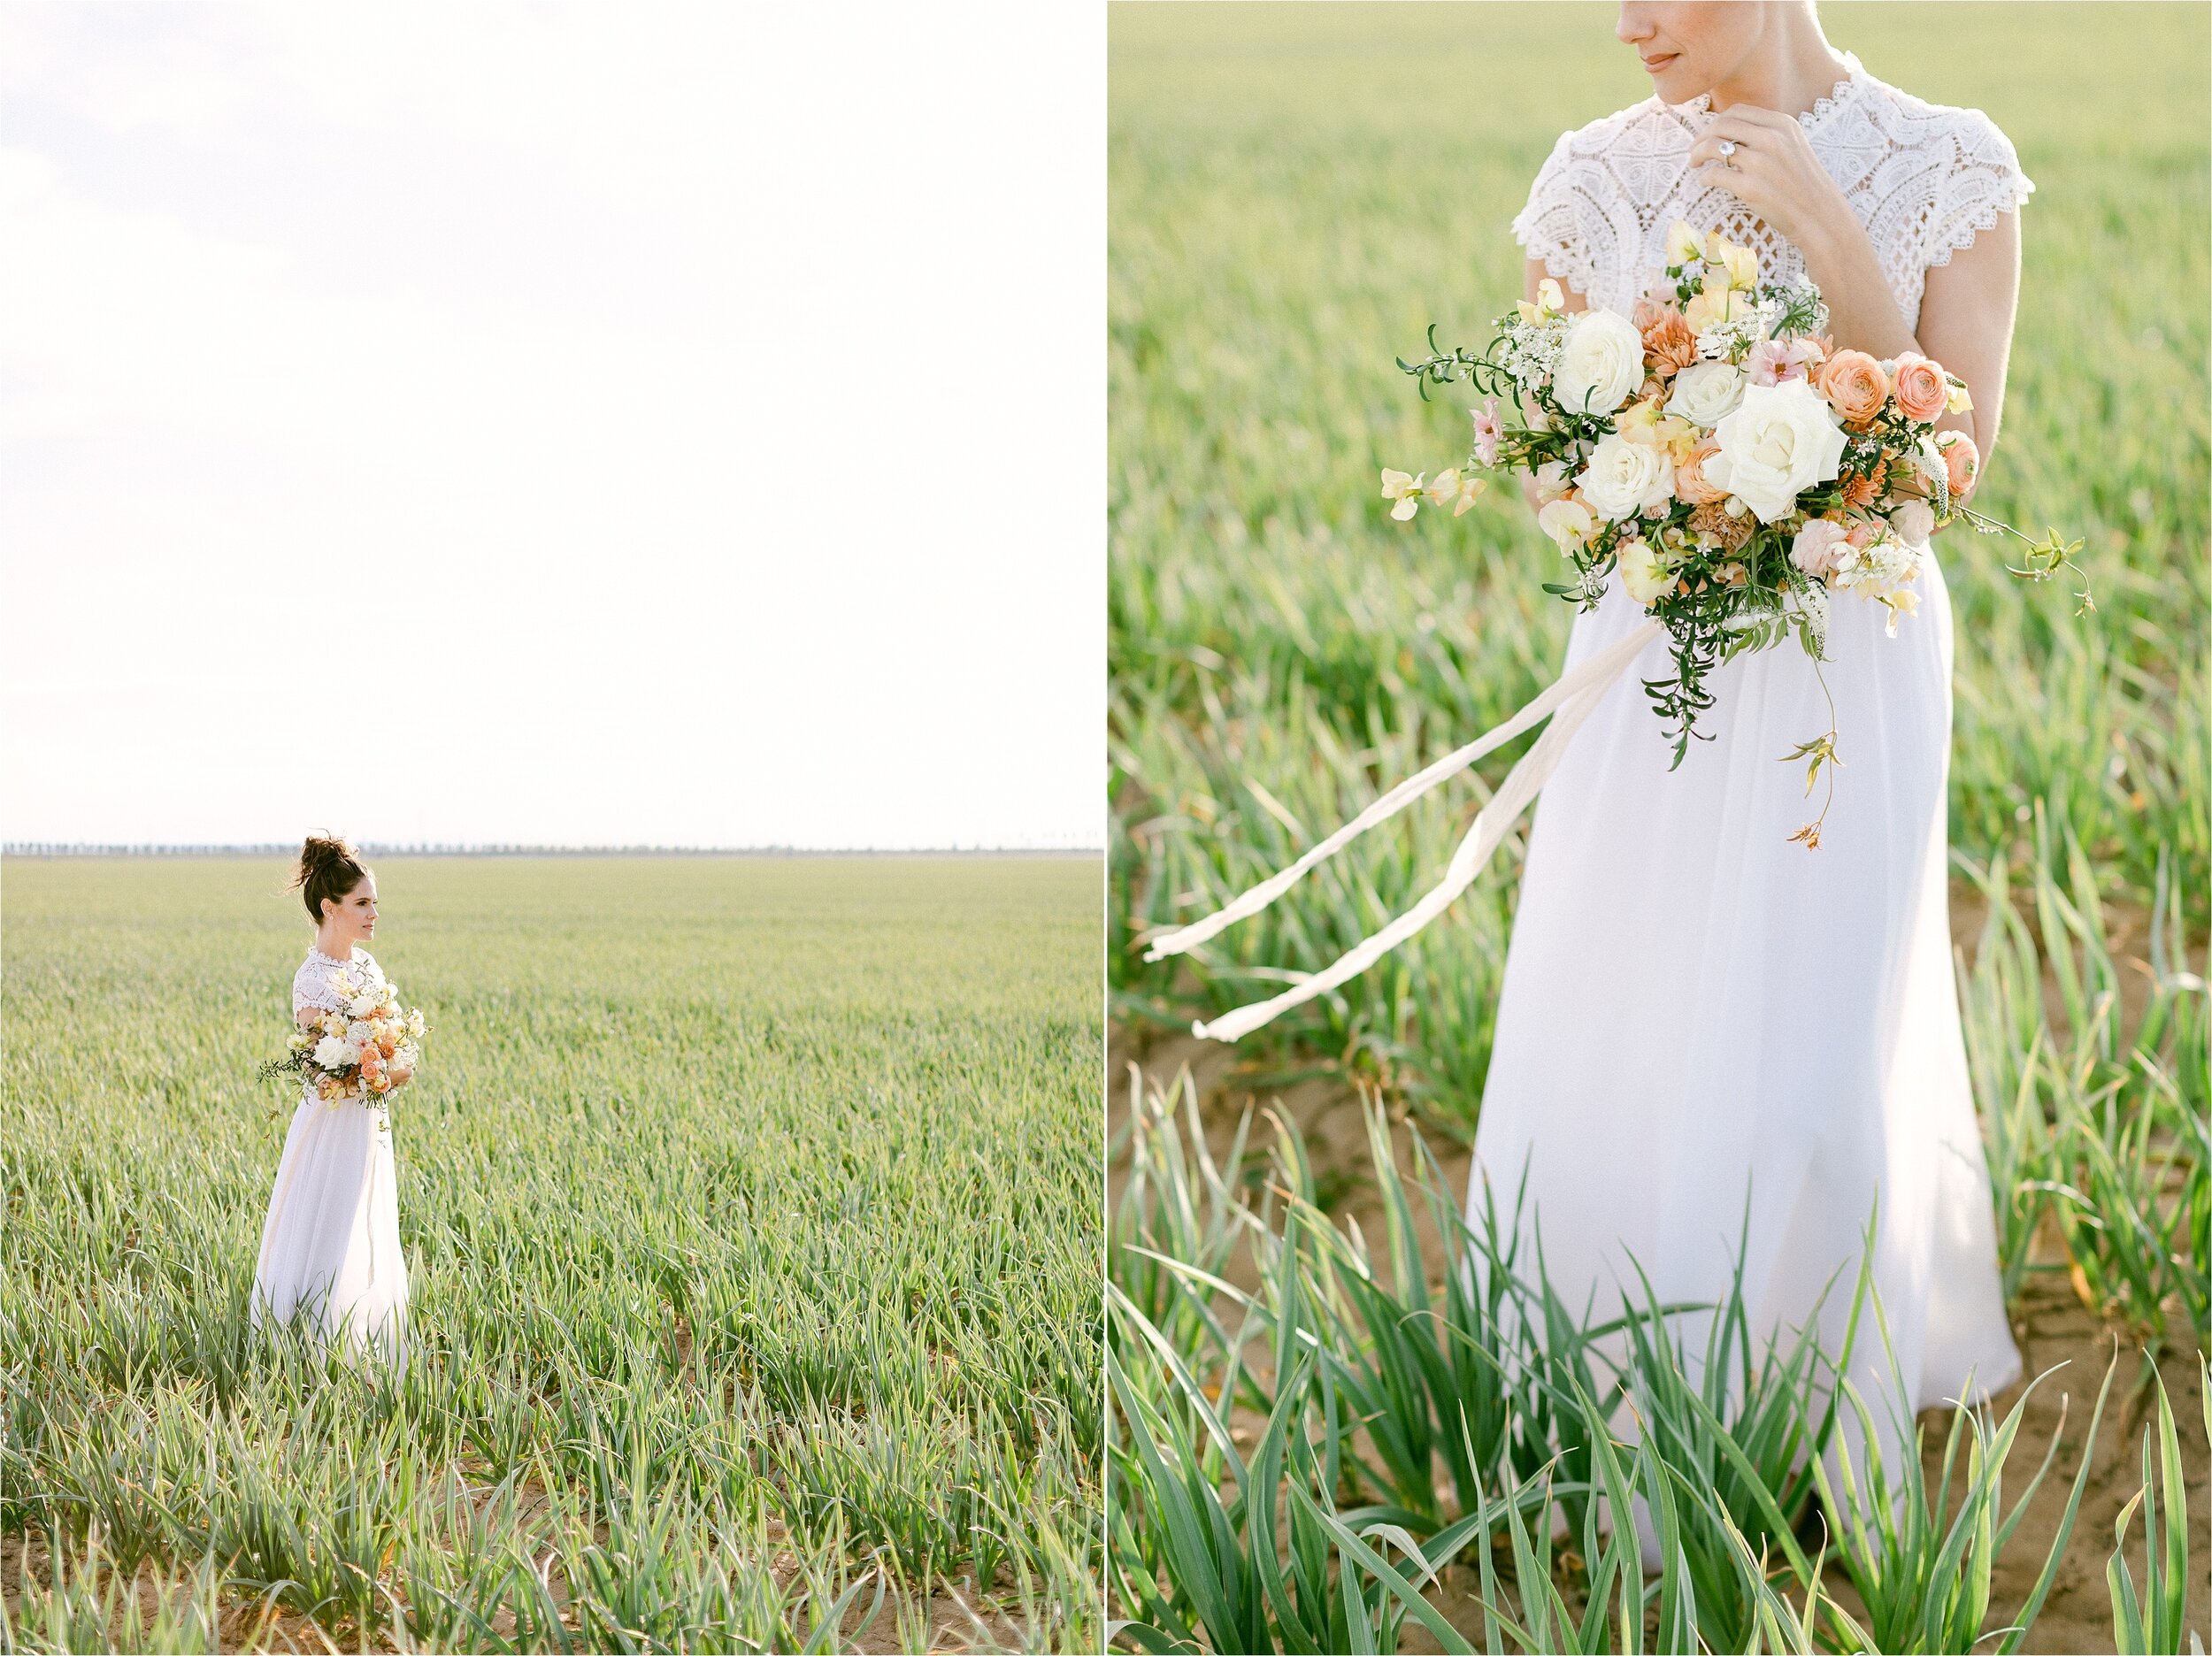 Bride in one of the best photo locations in southern California, with hair in a messy bun and holding peach, yellow and white bouquet with nude silk ribbon flowing in the wind.